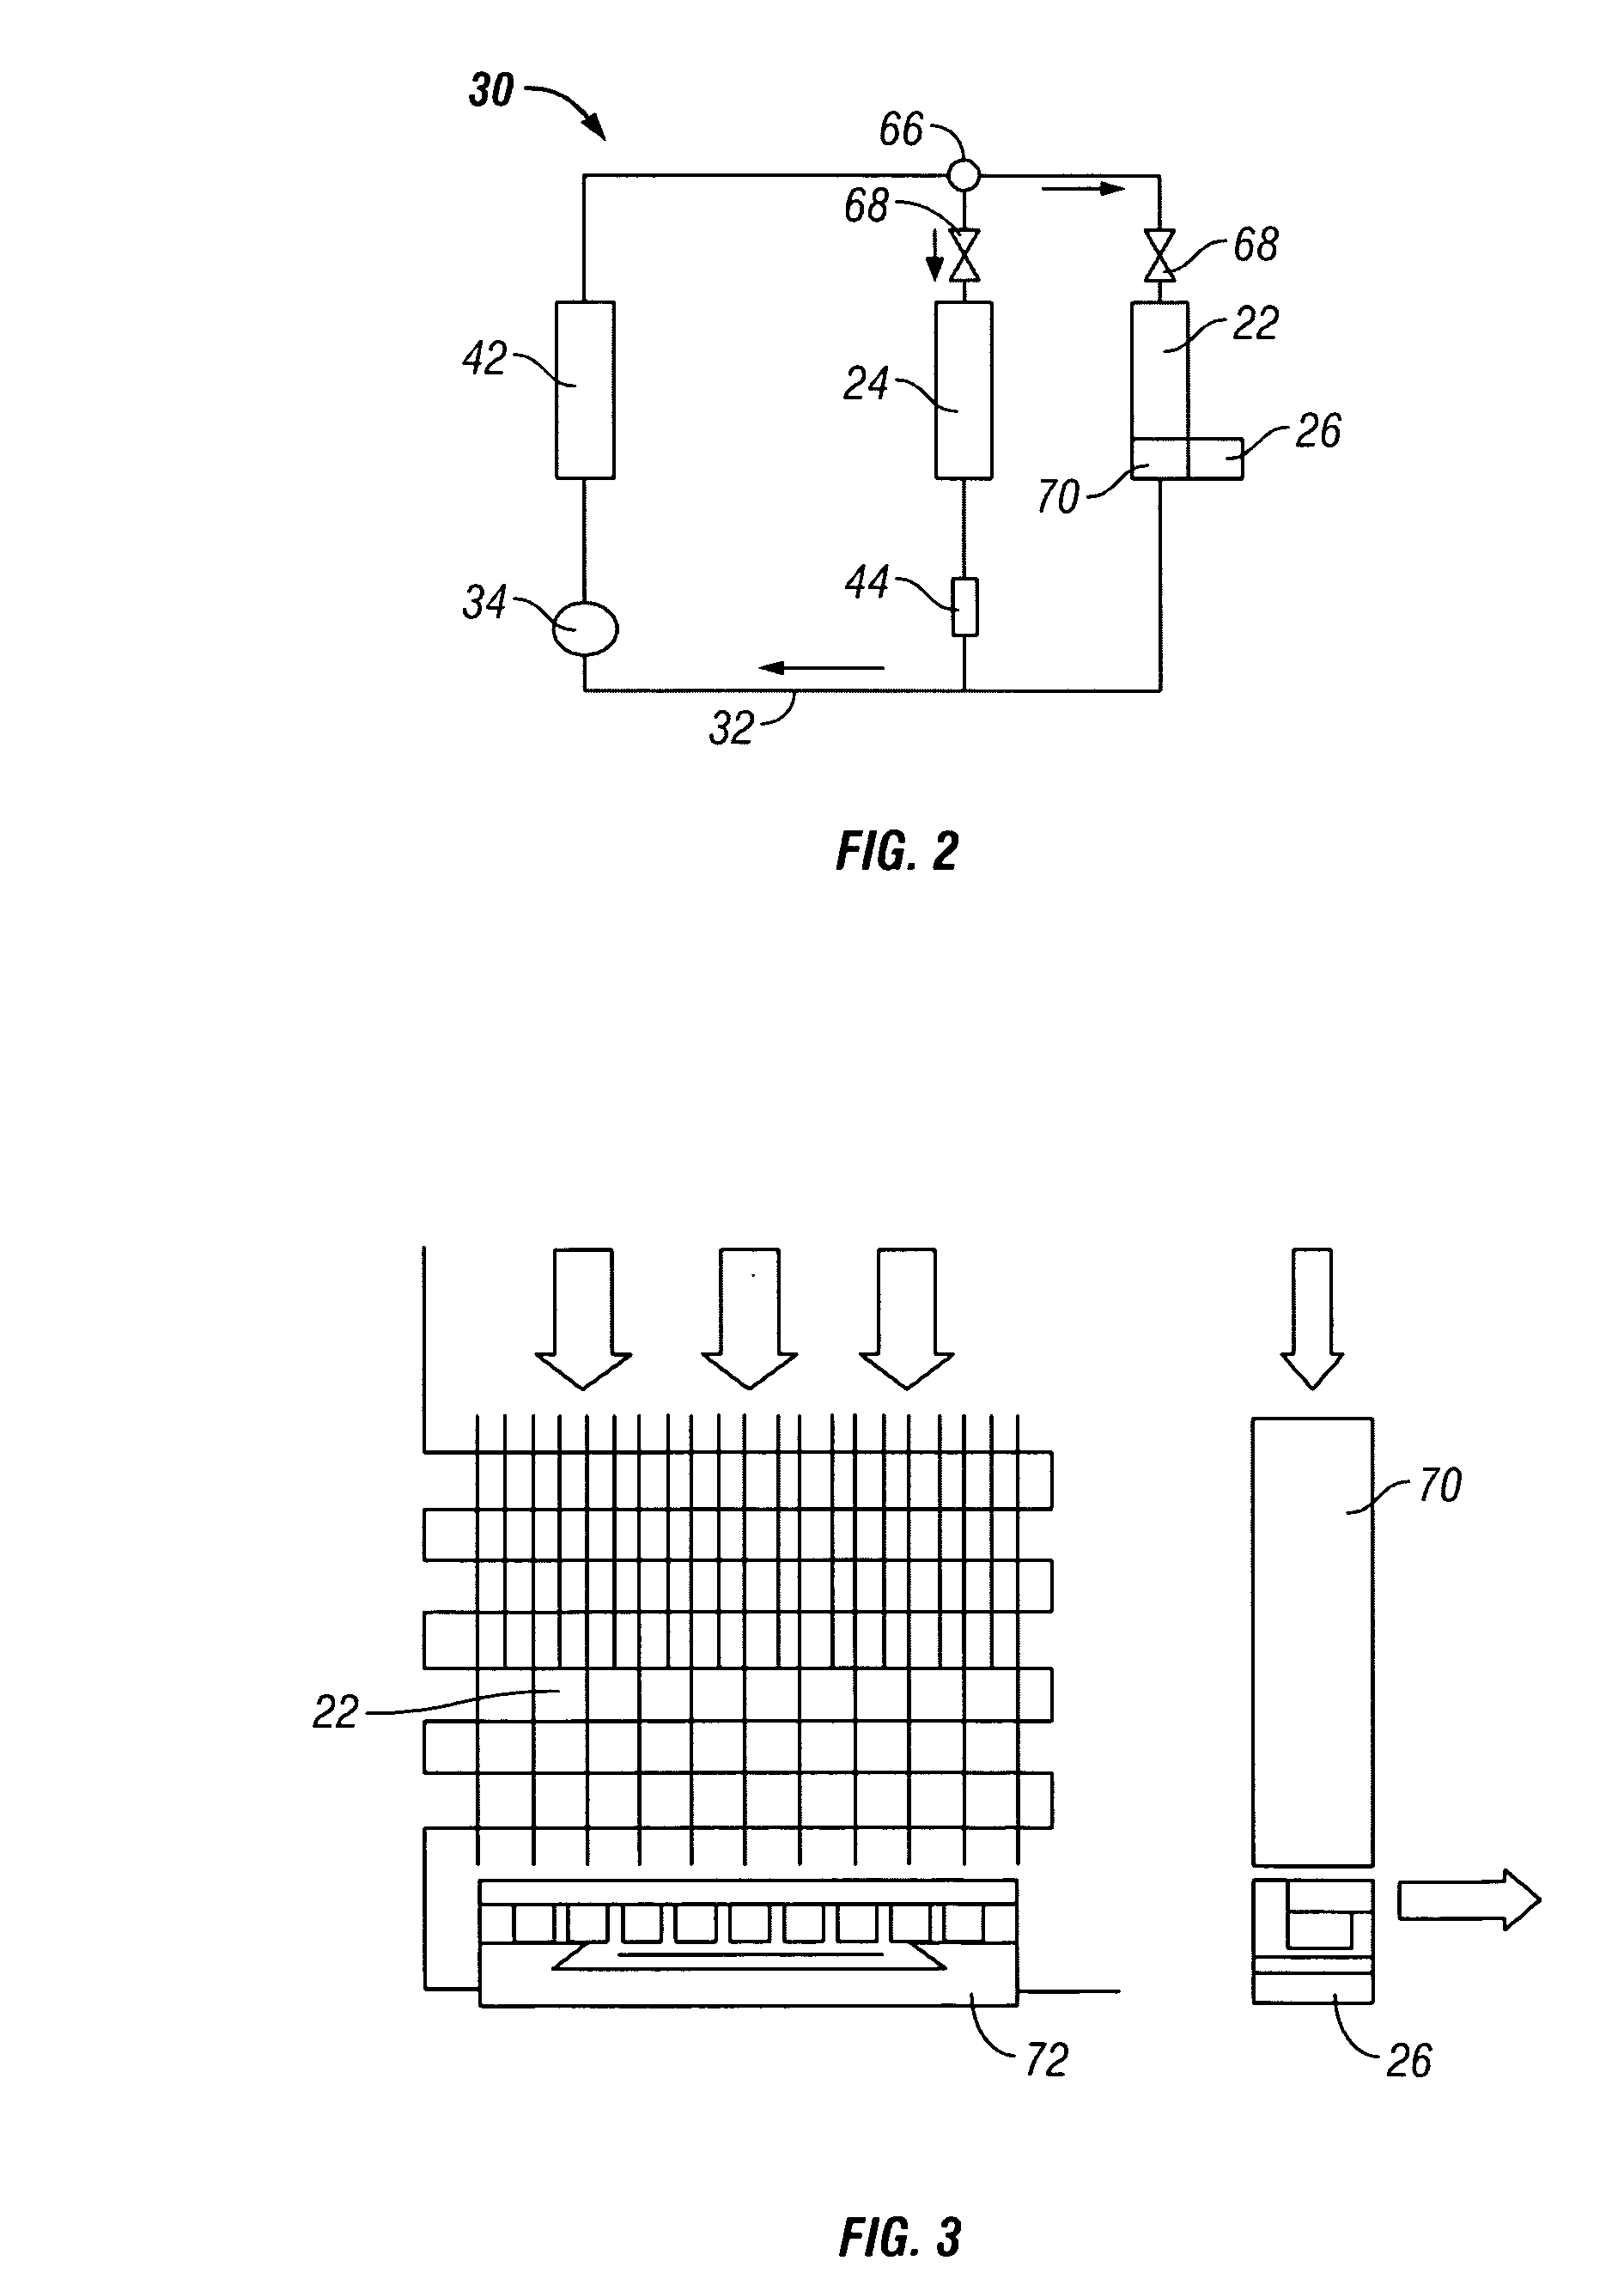 Secondary cooling apparatus and method for a refrigerator